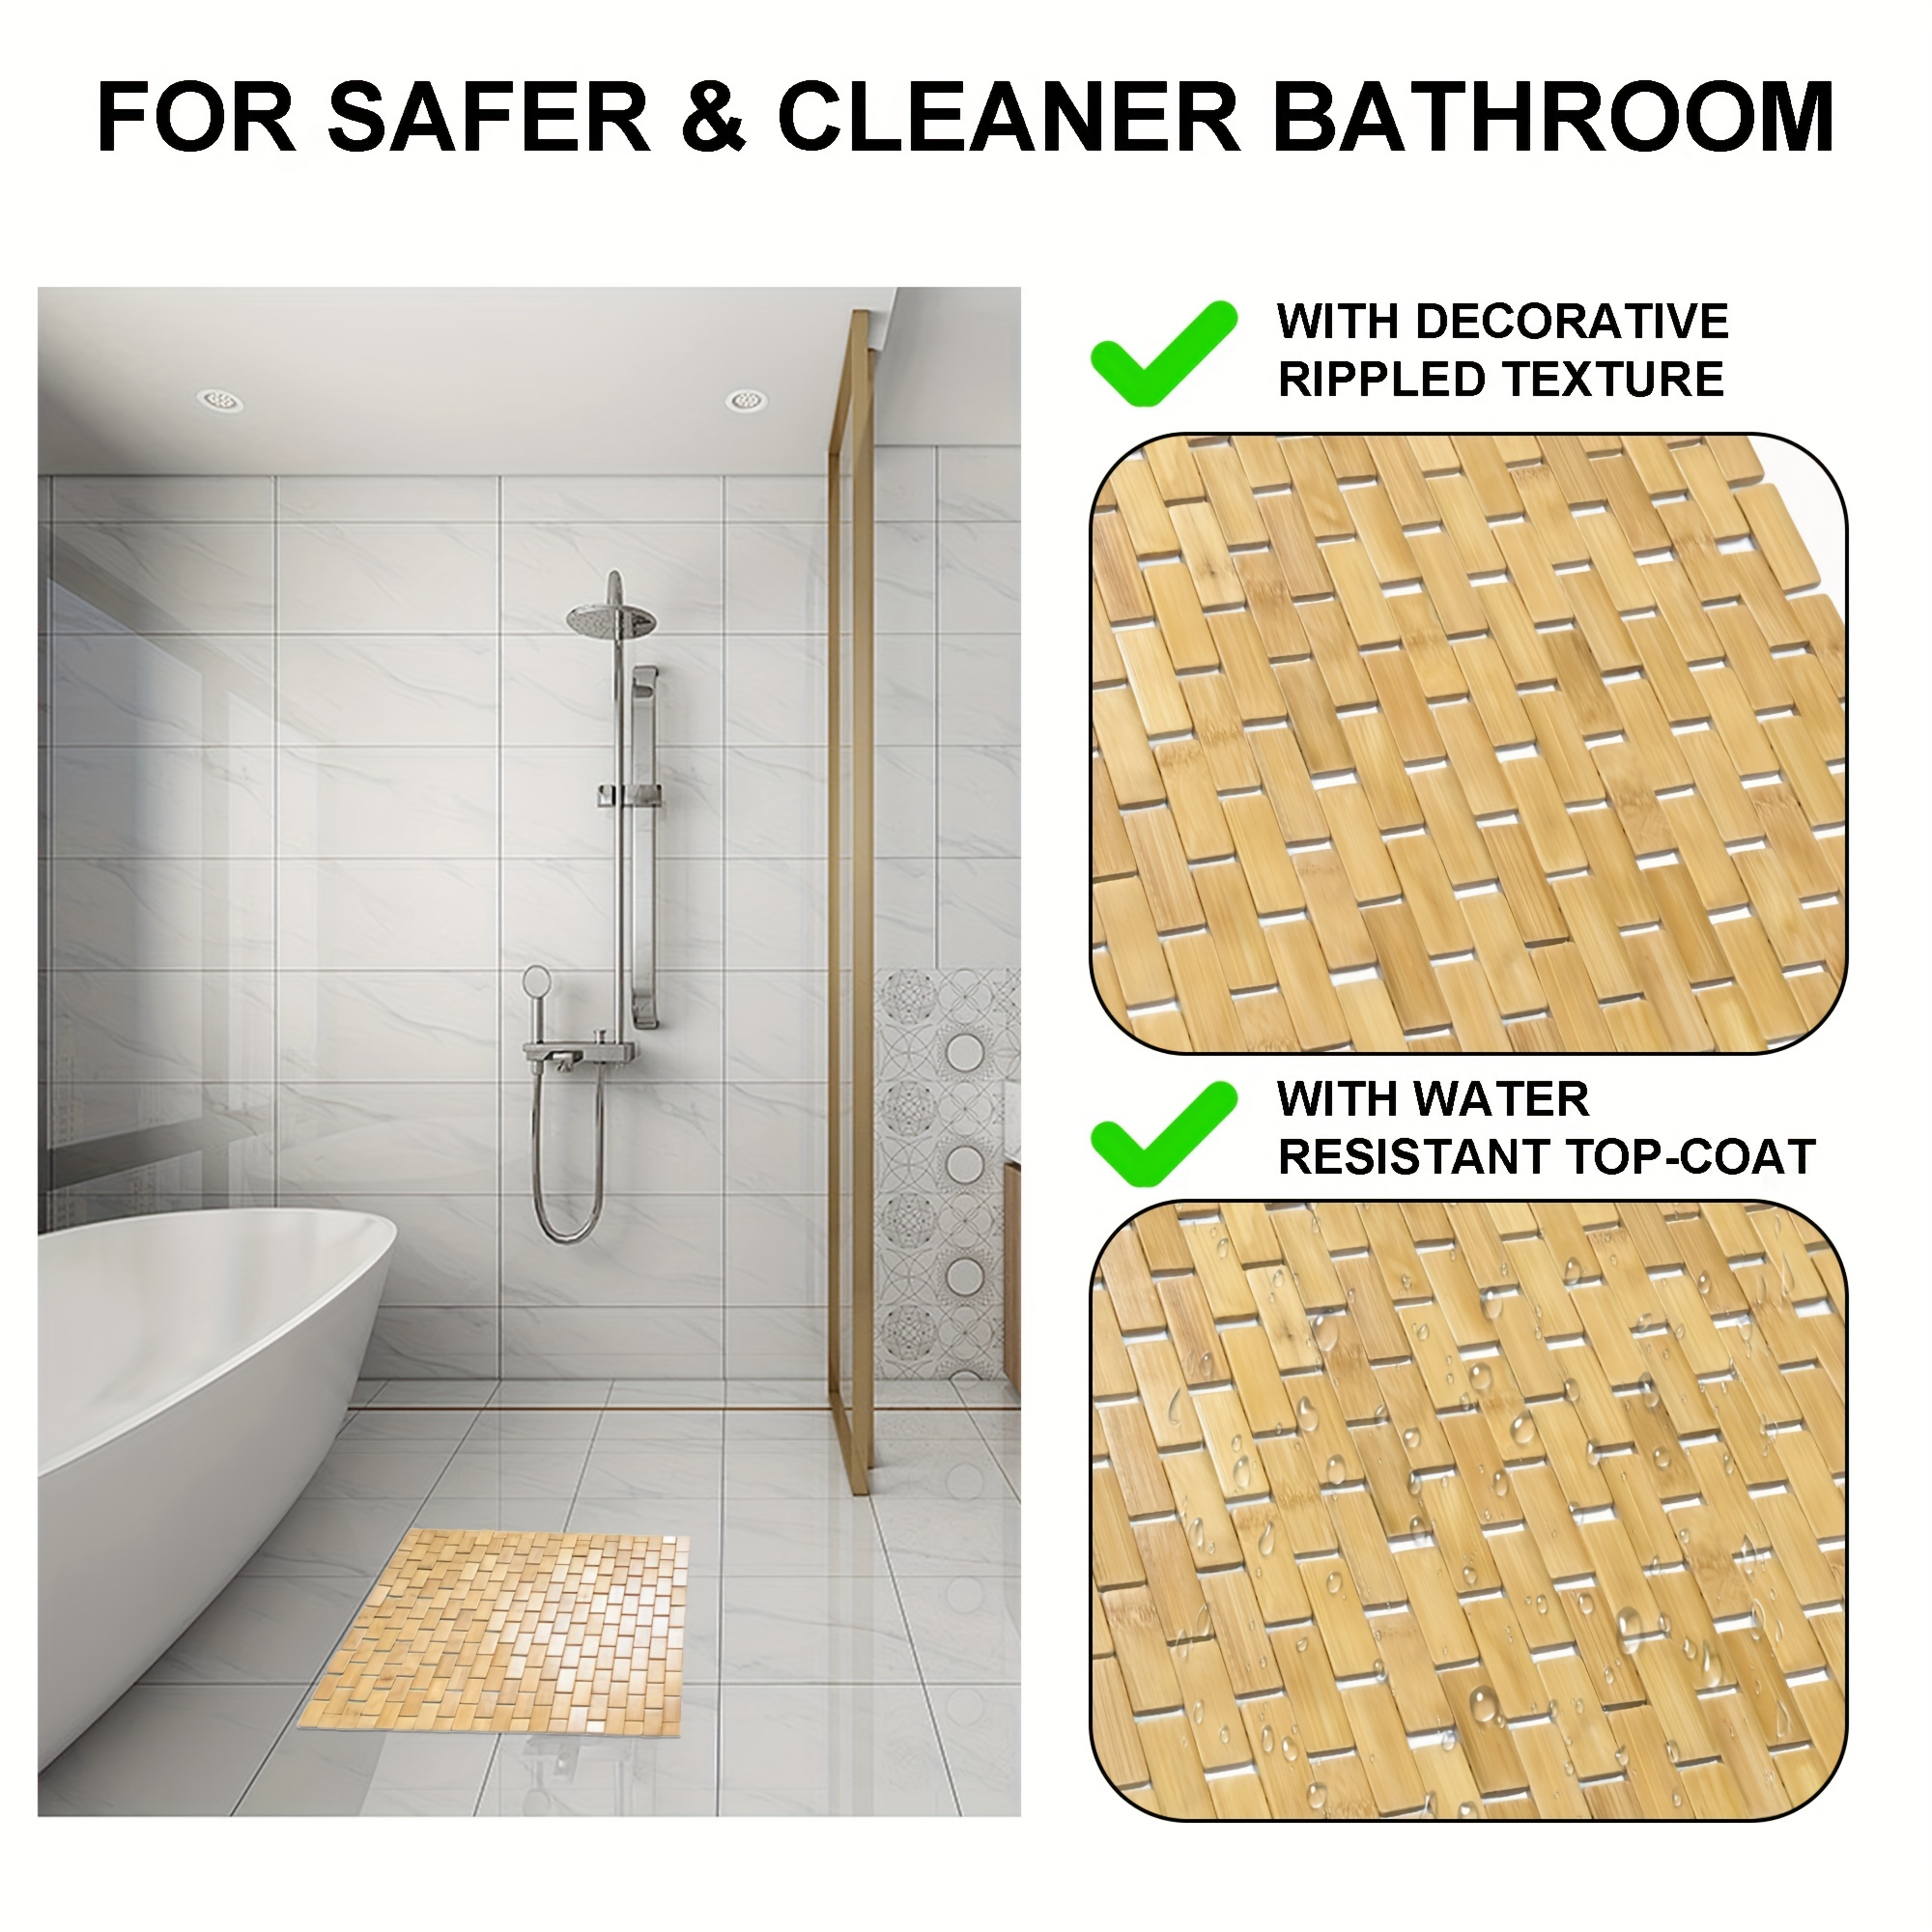 Spa floor + showers with GriP anti-slip Safety Coating.